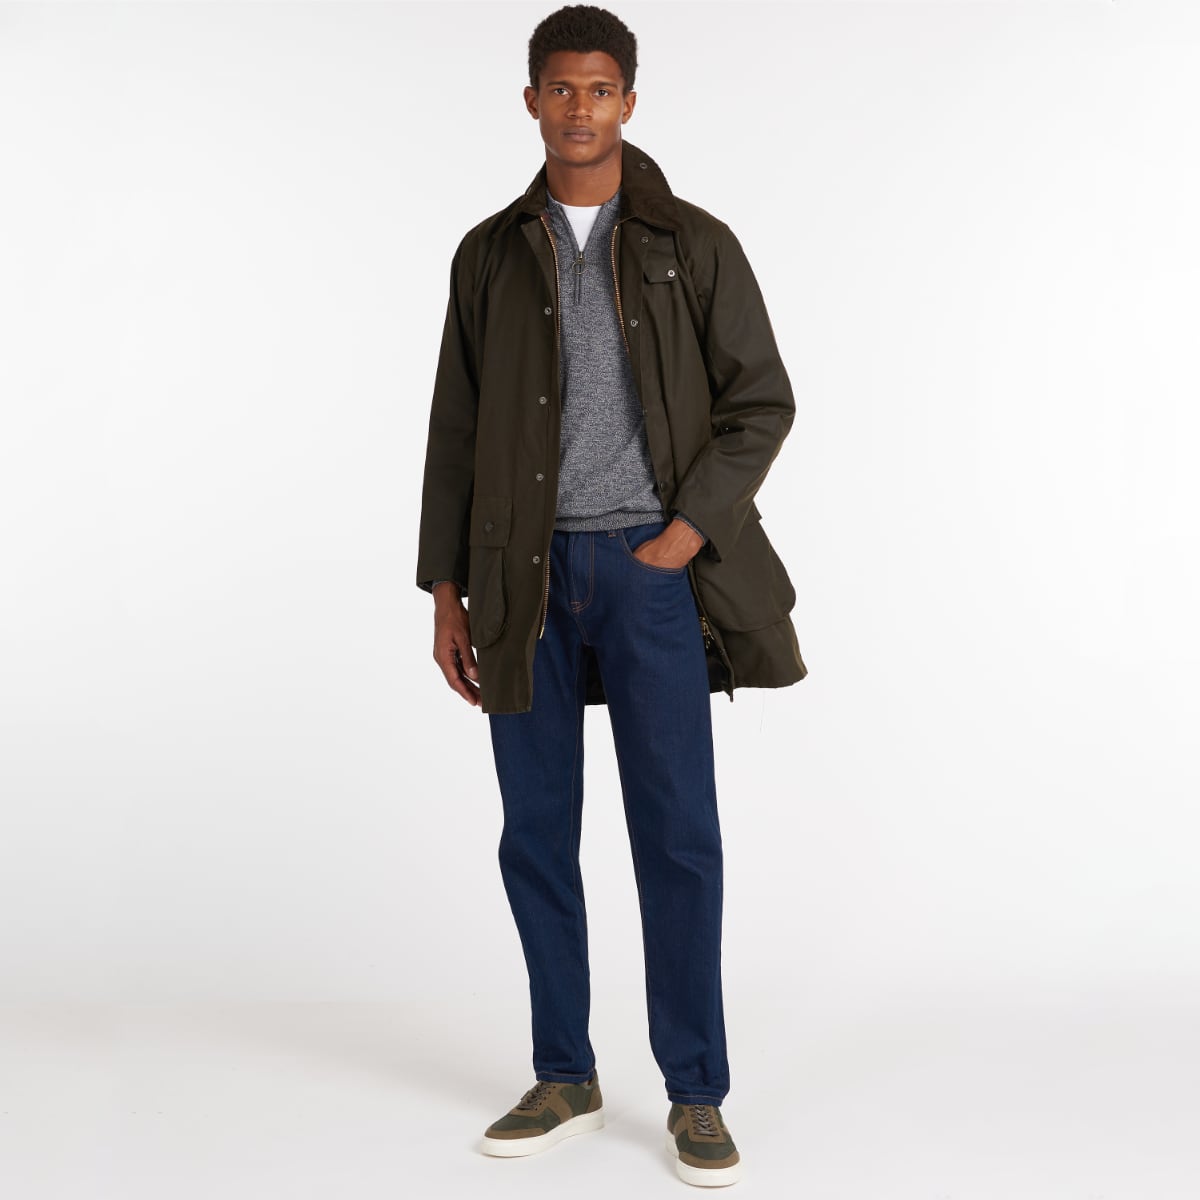 Barbour Classic Northumbria Men's Waxed Jacket | Olive